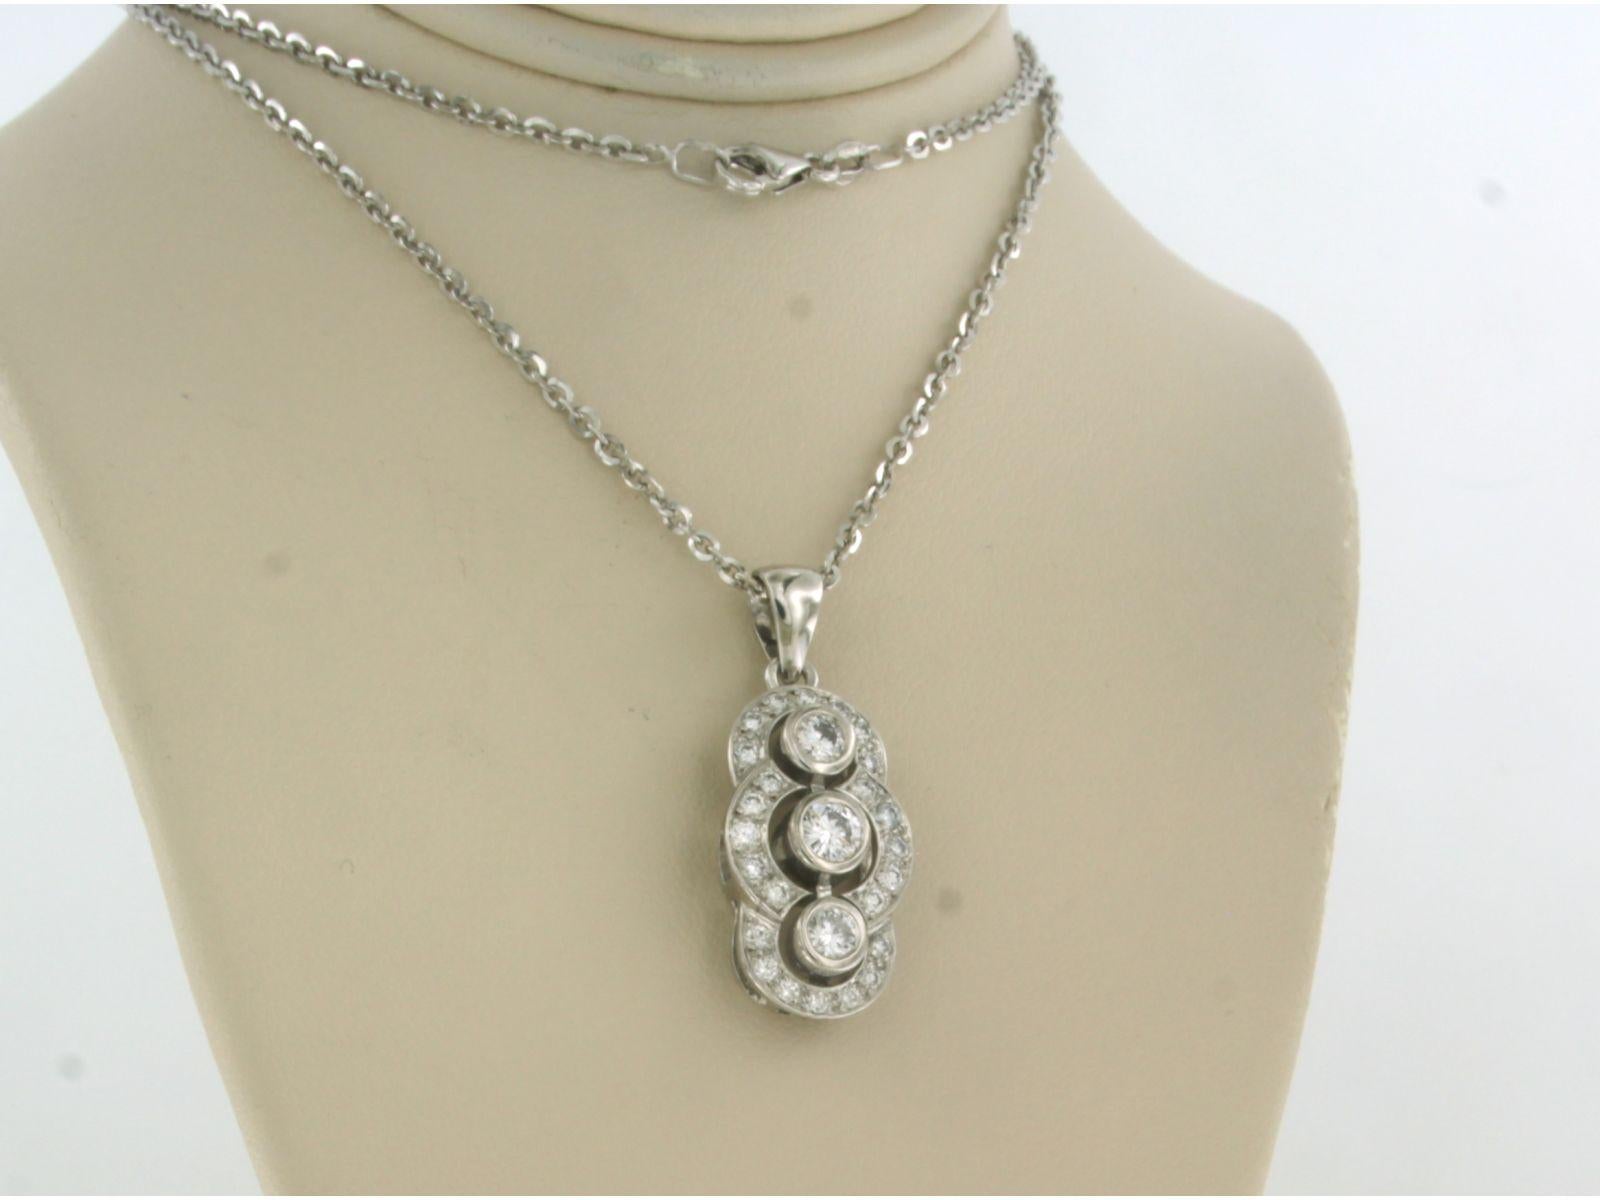 18k white gold necklace with pendant set with brilliant cut diamonds total approx.  0.89ct - F/G - VS/SI - 45cm

Detailed description

the length of the necklace is 45 cm long by 1.8 mm wide

Dimensions of the pendant are 2.5 cm high by 1.2 cm